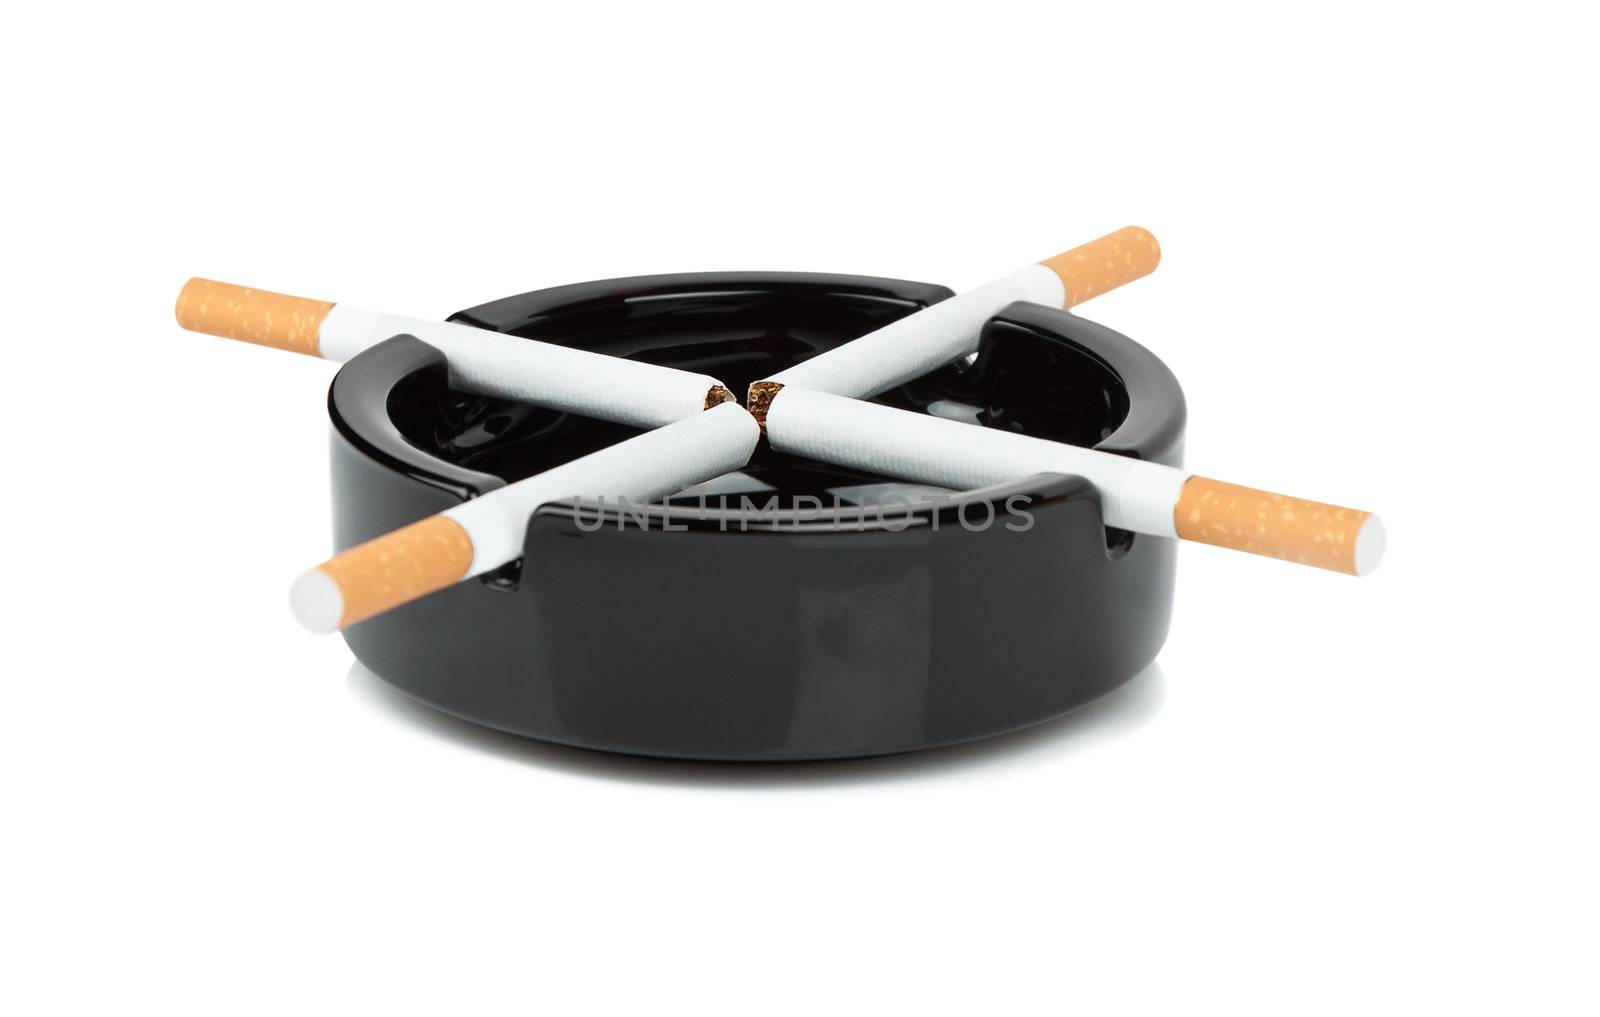 cigarette in an ashtray by Pogost